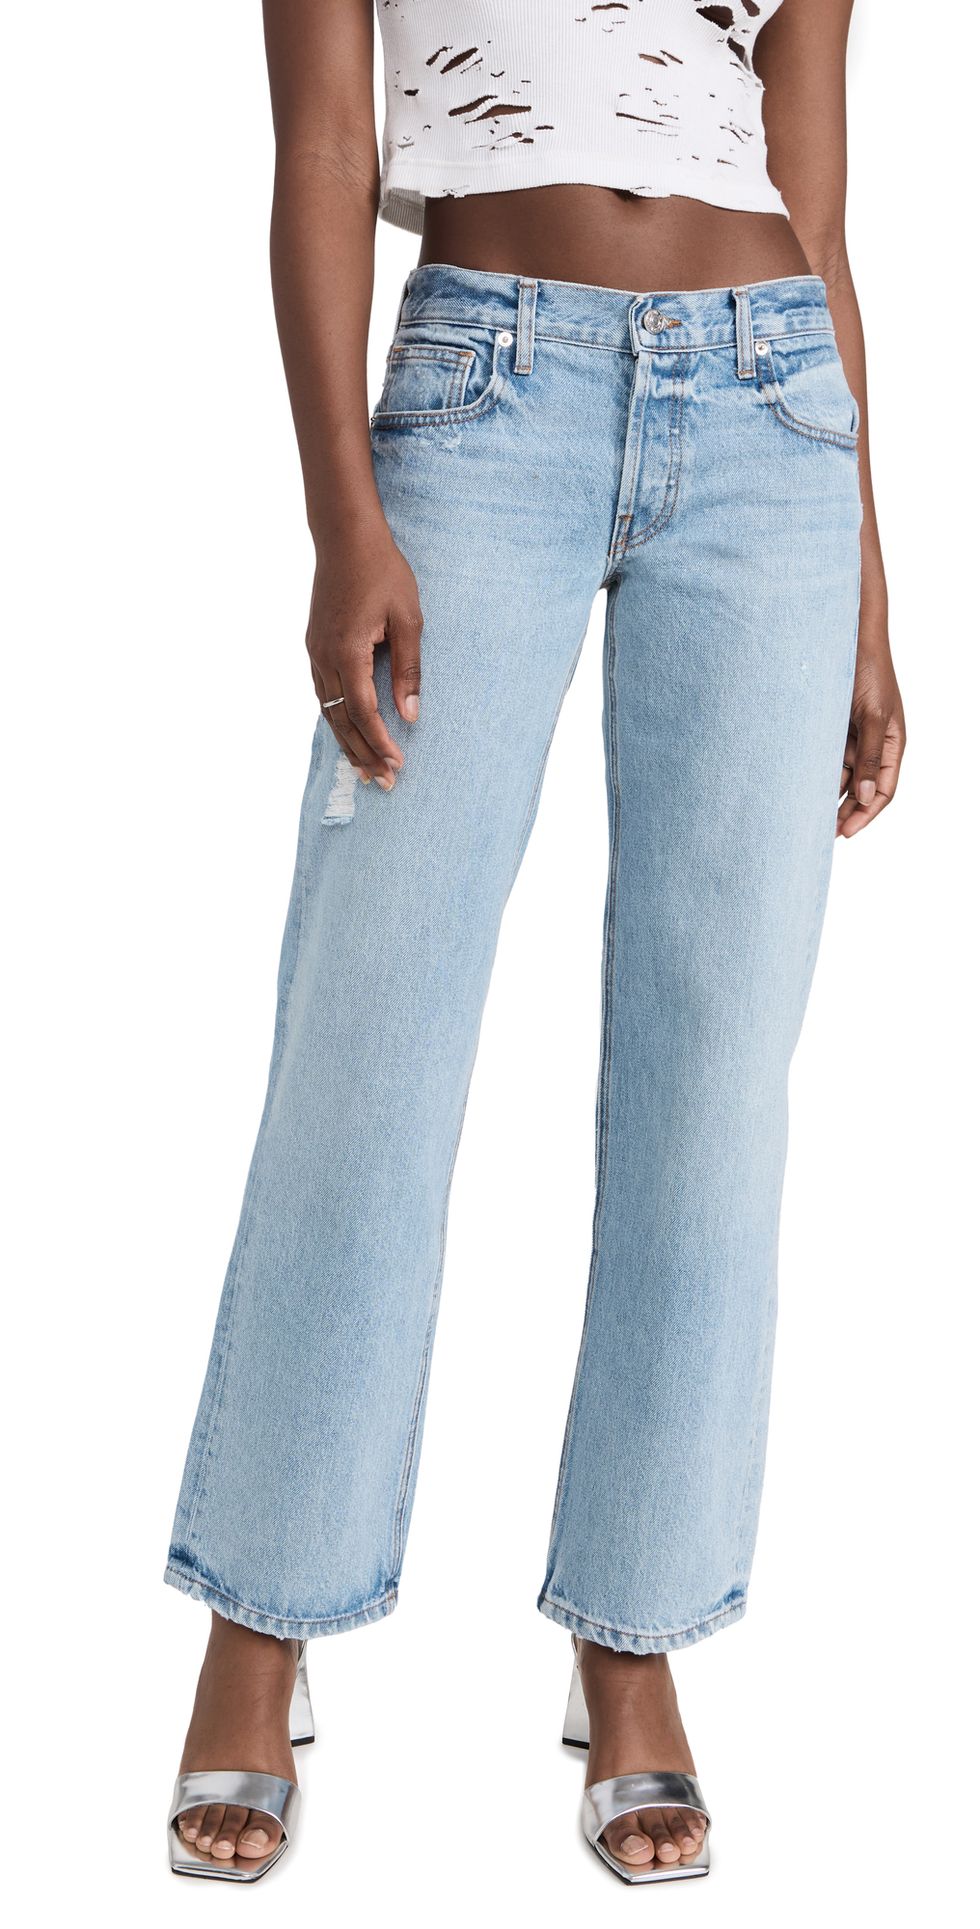 Risen Jeans Are My New Mother Denim Dupes - The Mom Edit